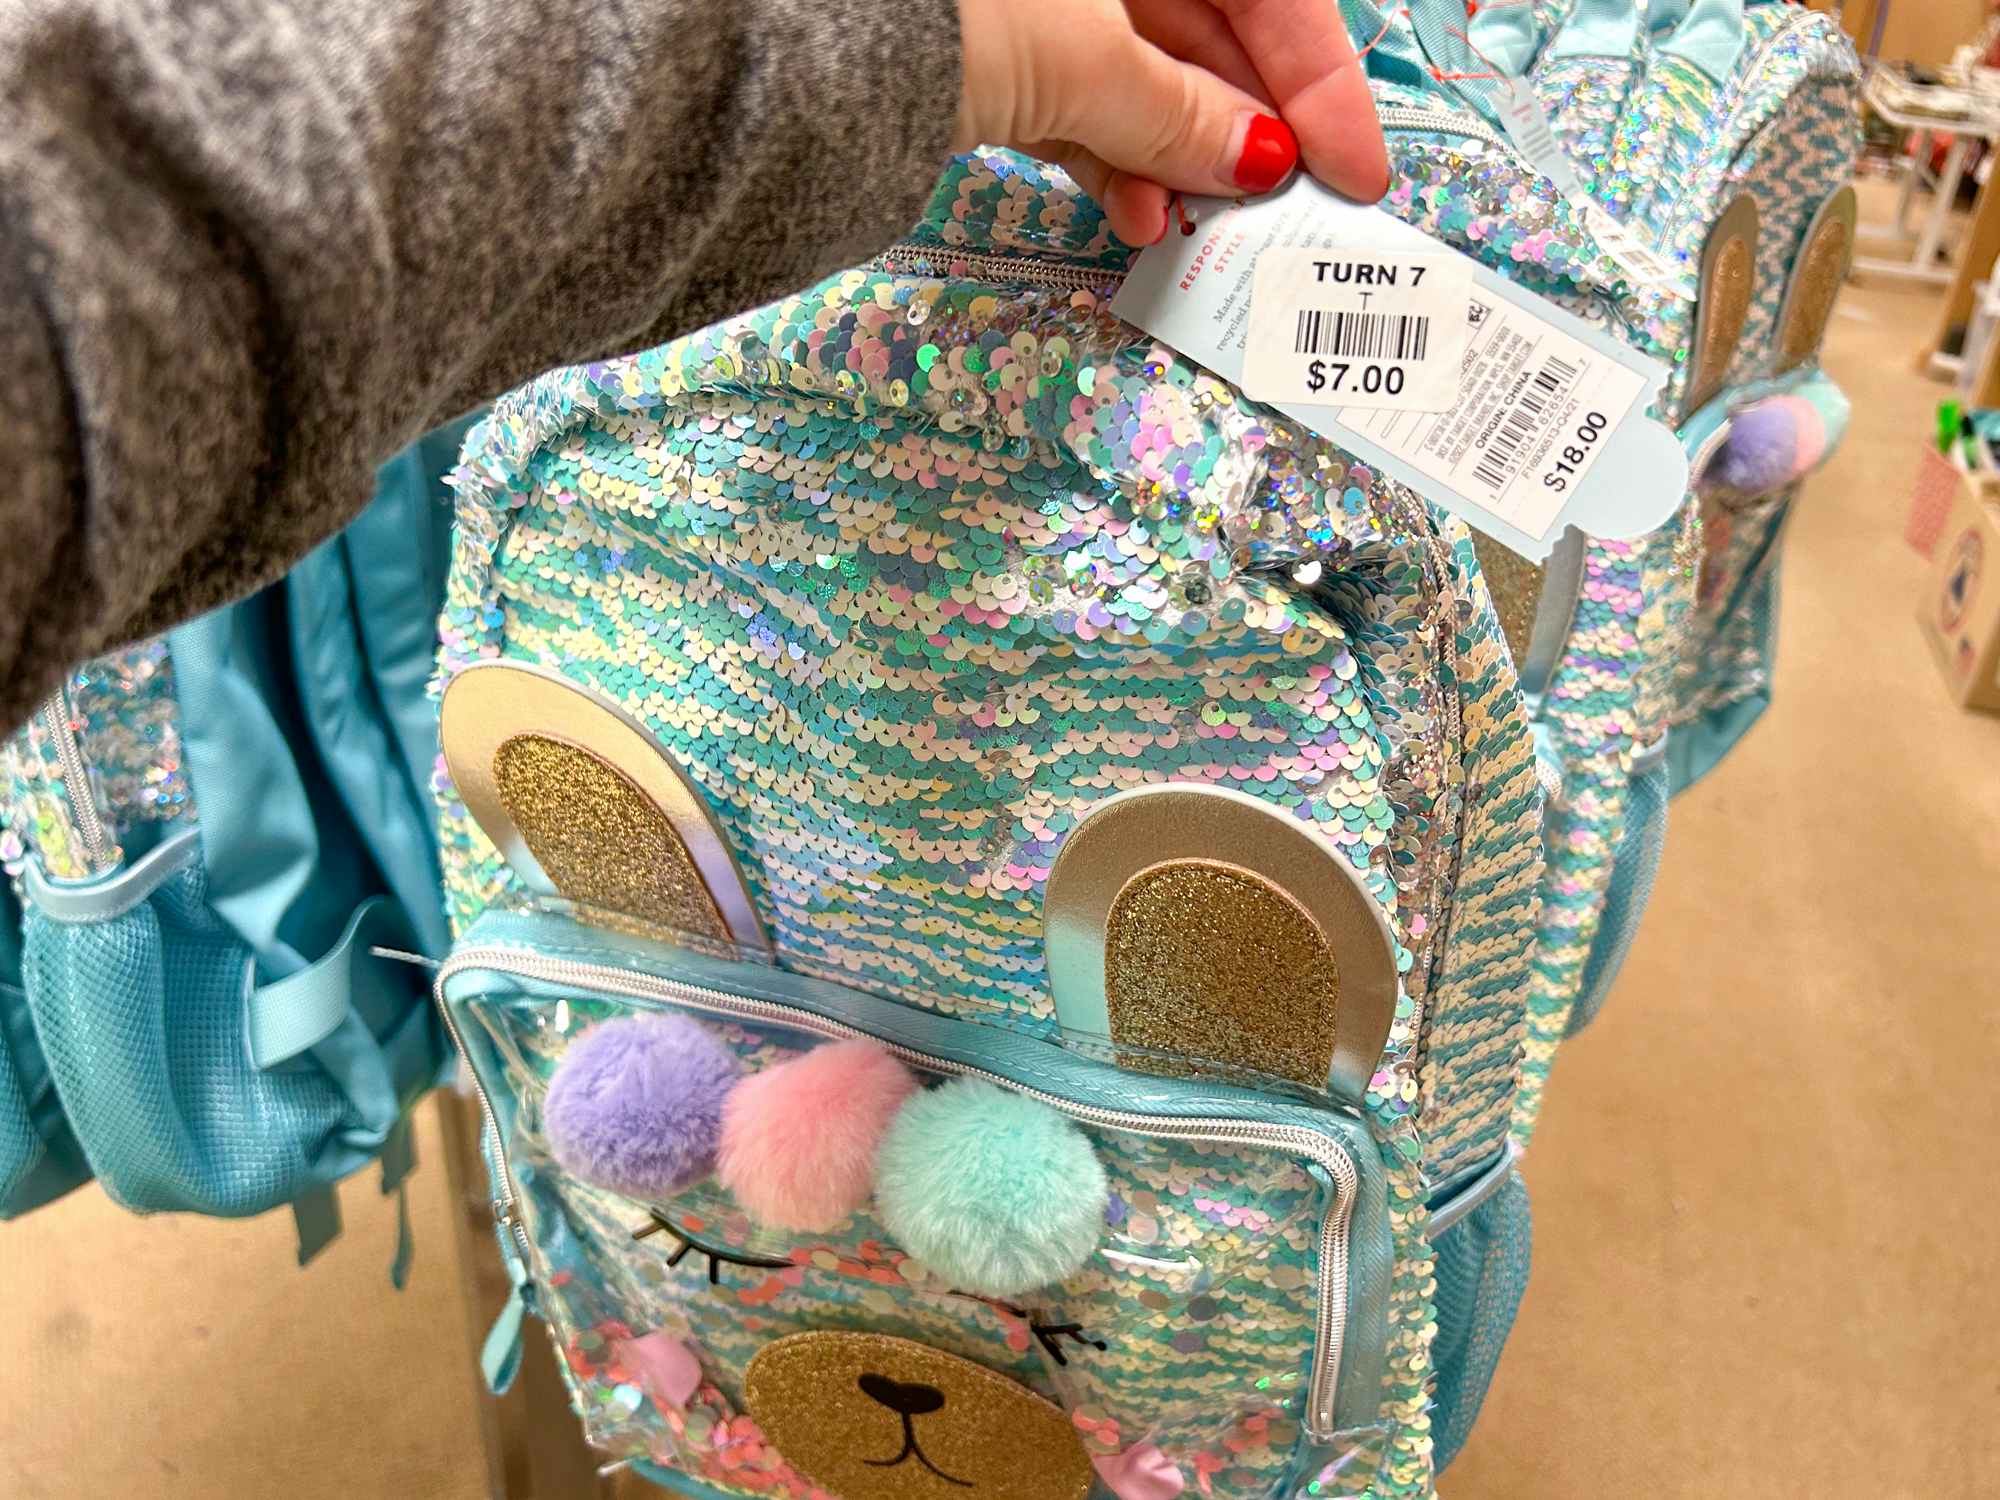 A sparkly Cat & Jack backpack with a price tag of $7 at Turn7